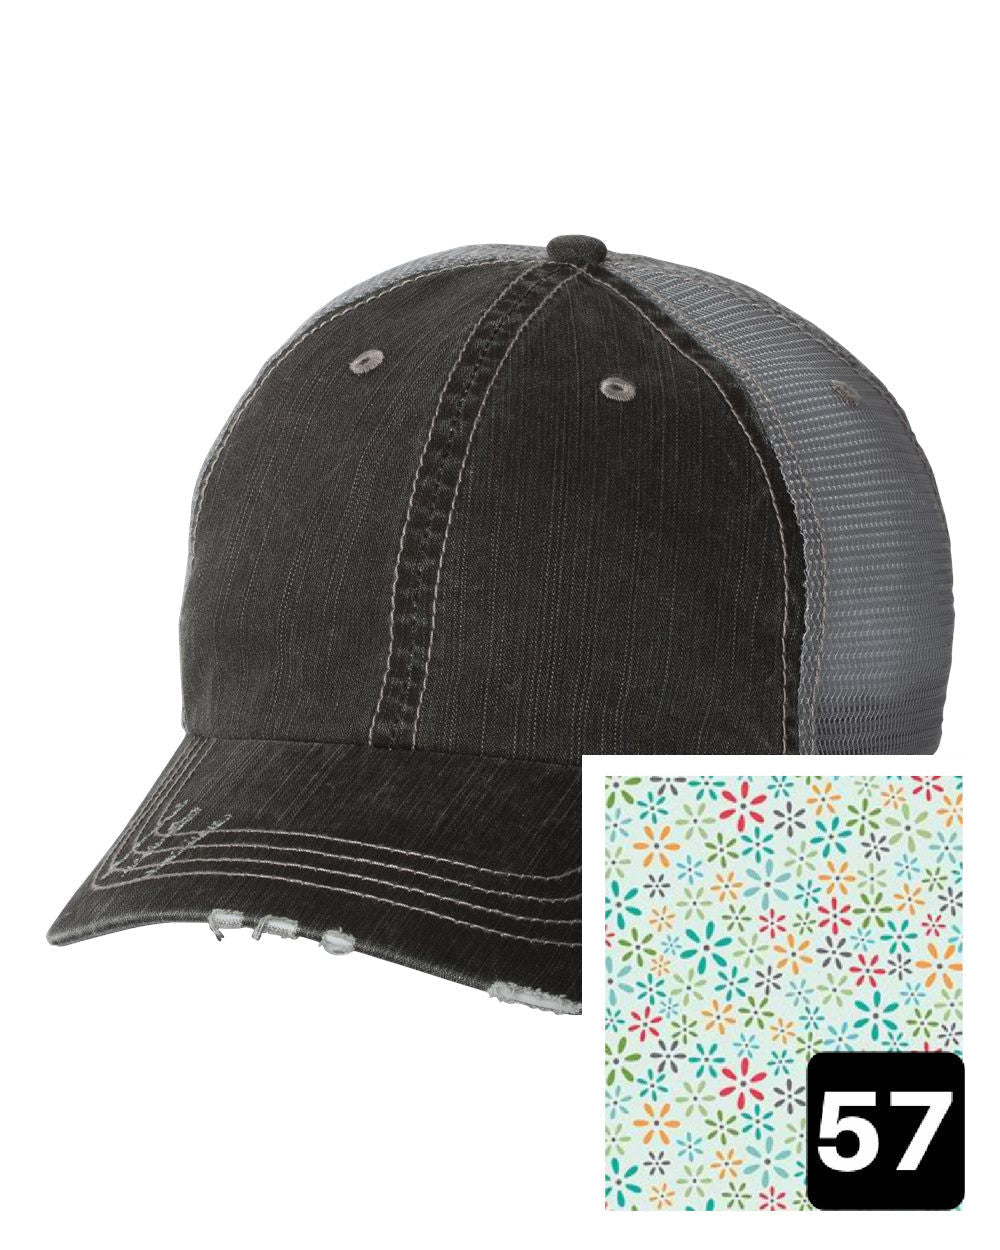 gray distressed trucker hat with white daisy on yellow fabric state of Pennsylvania